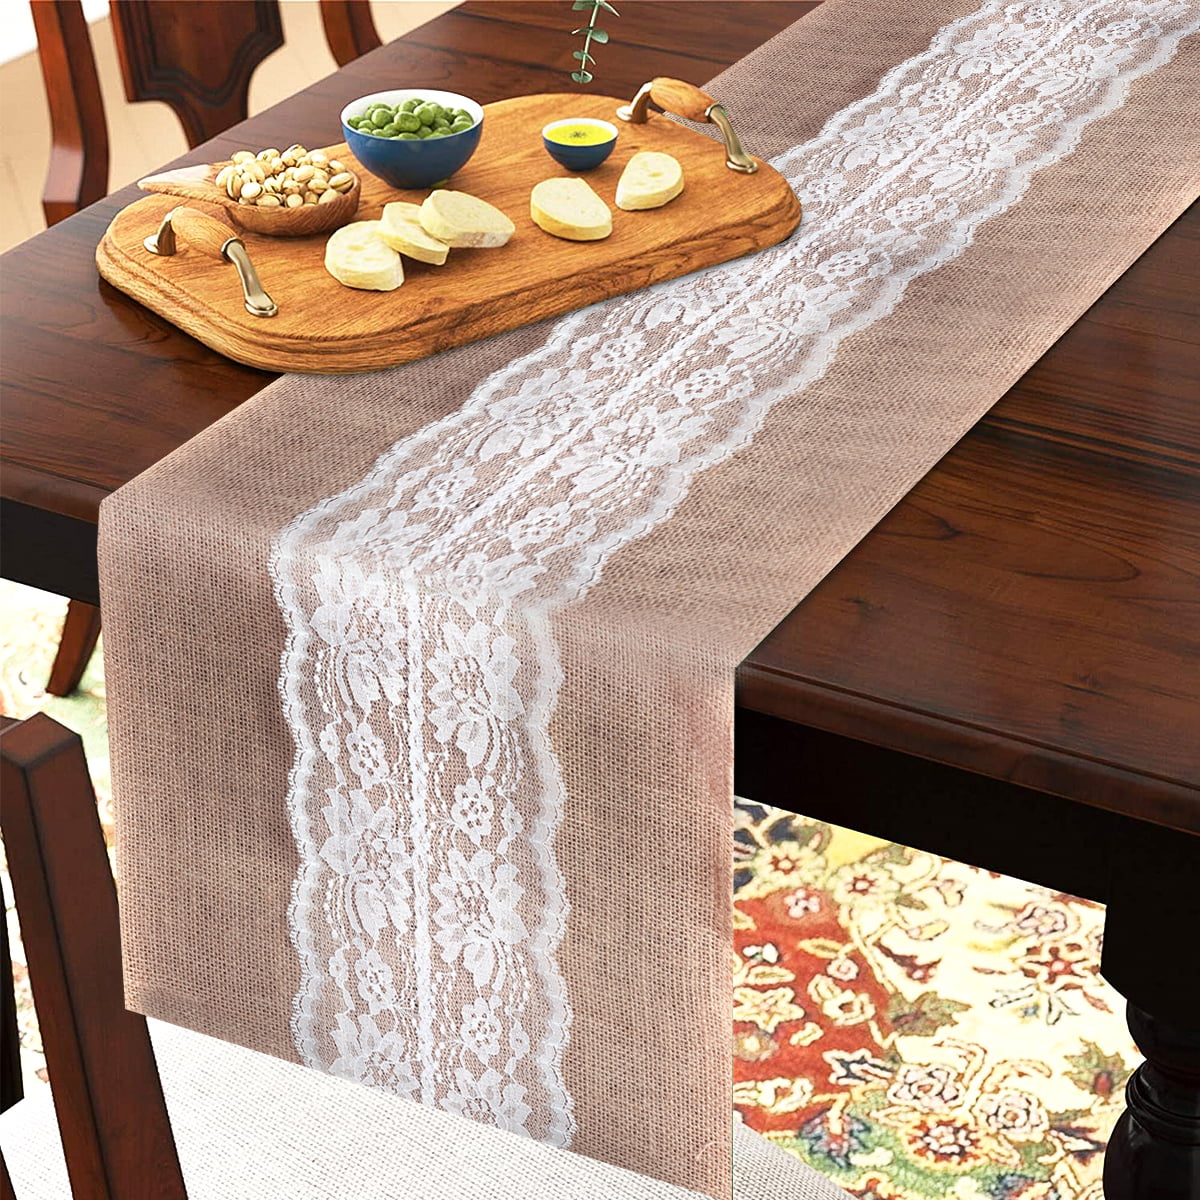 copper orange  flowers. Embroidered Vintage Rectangular table Runner Topper  36  by 13  Inches  White